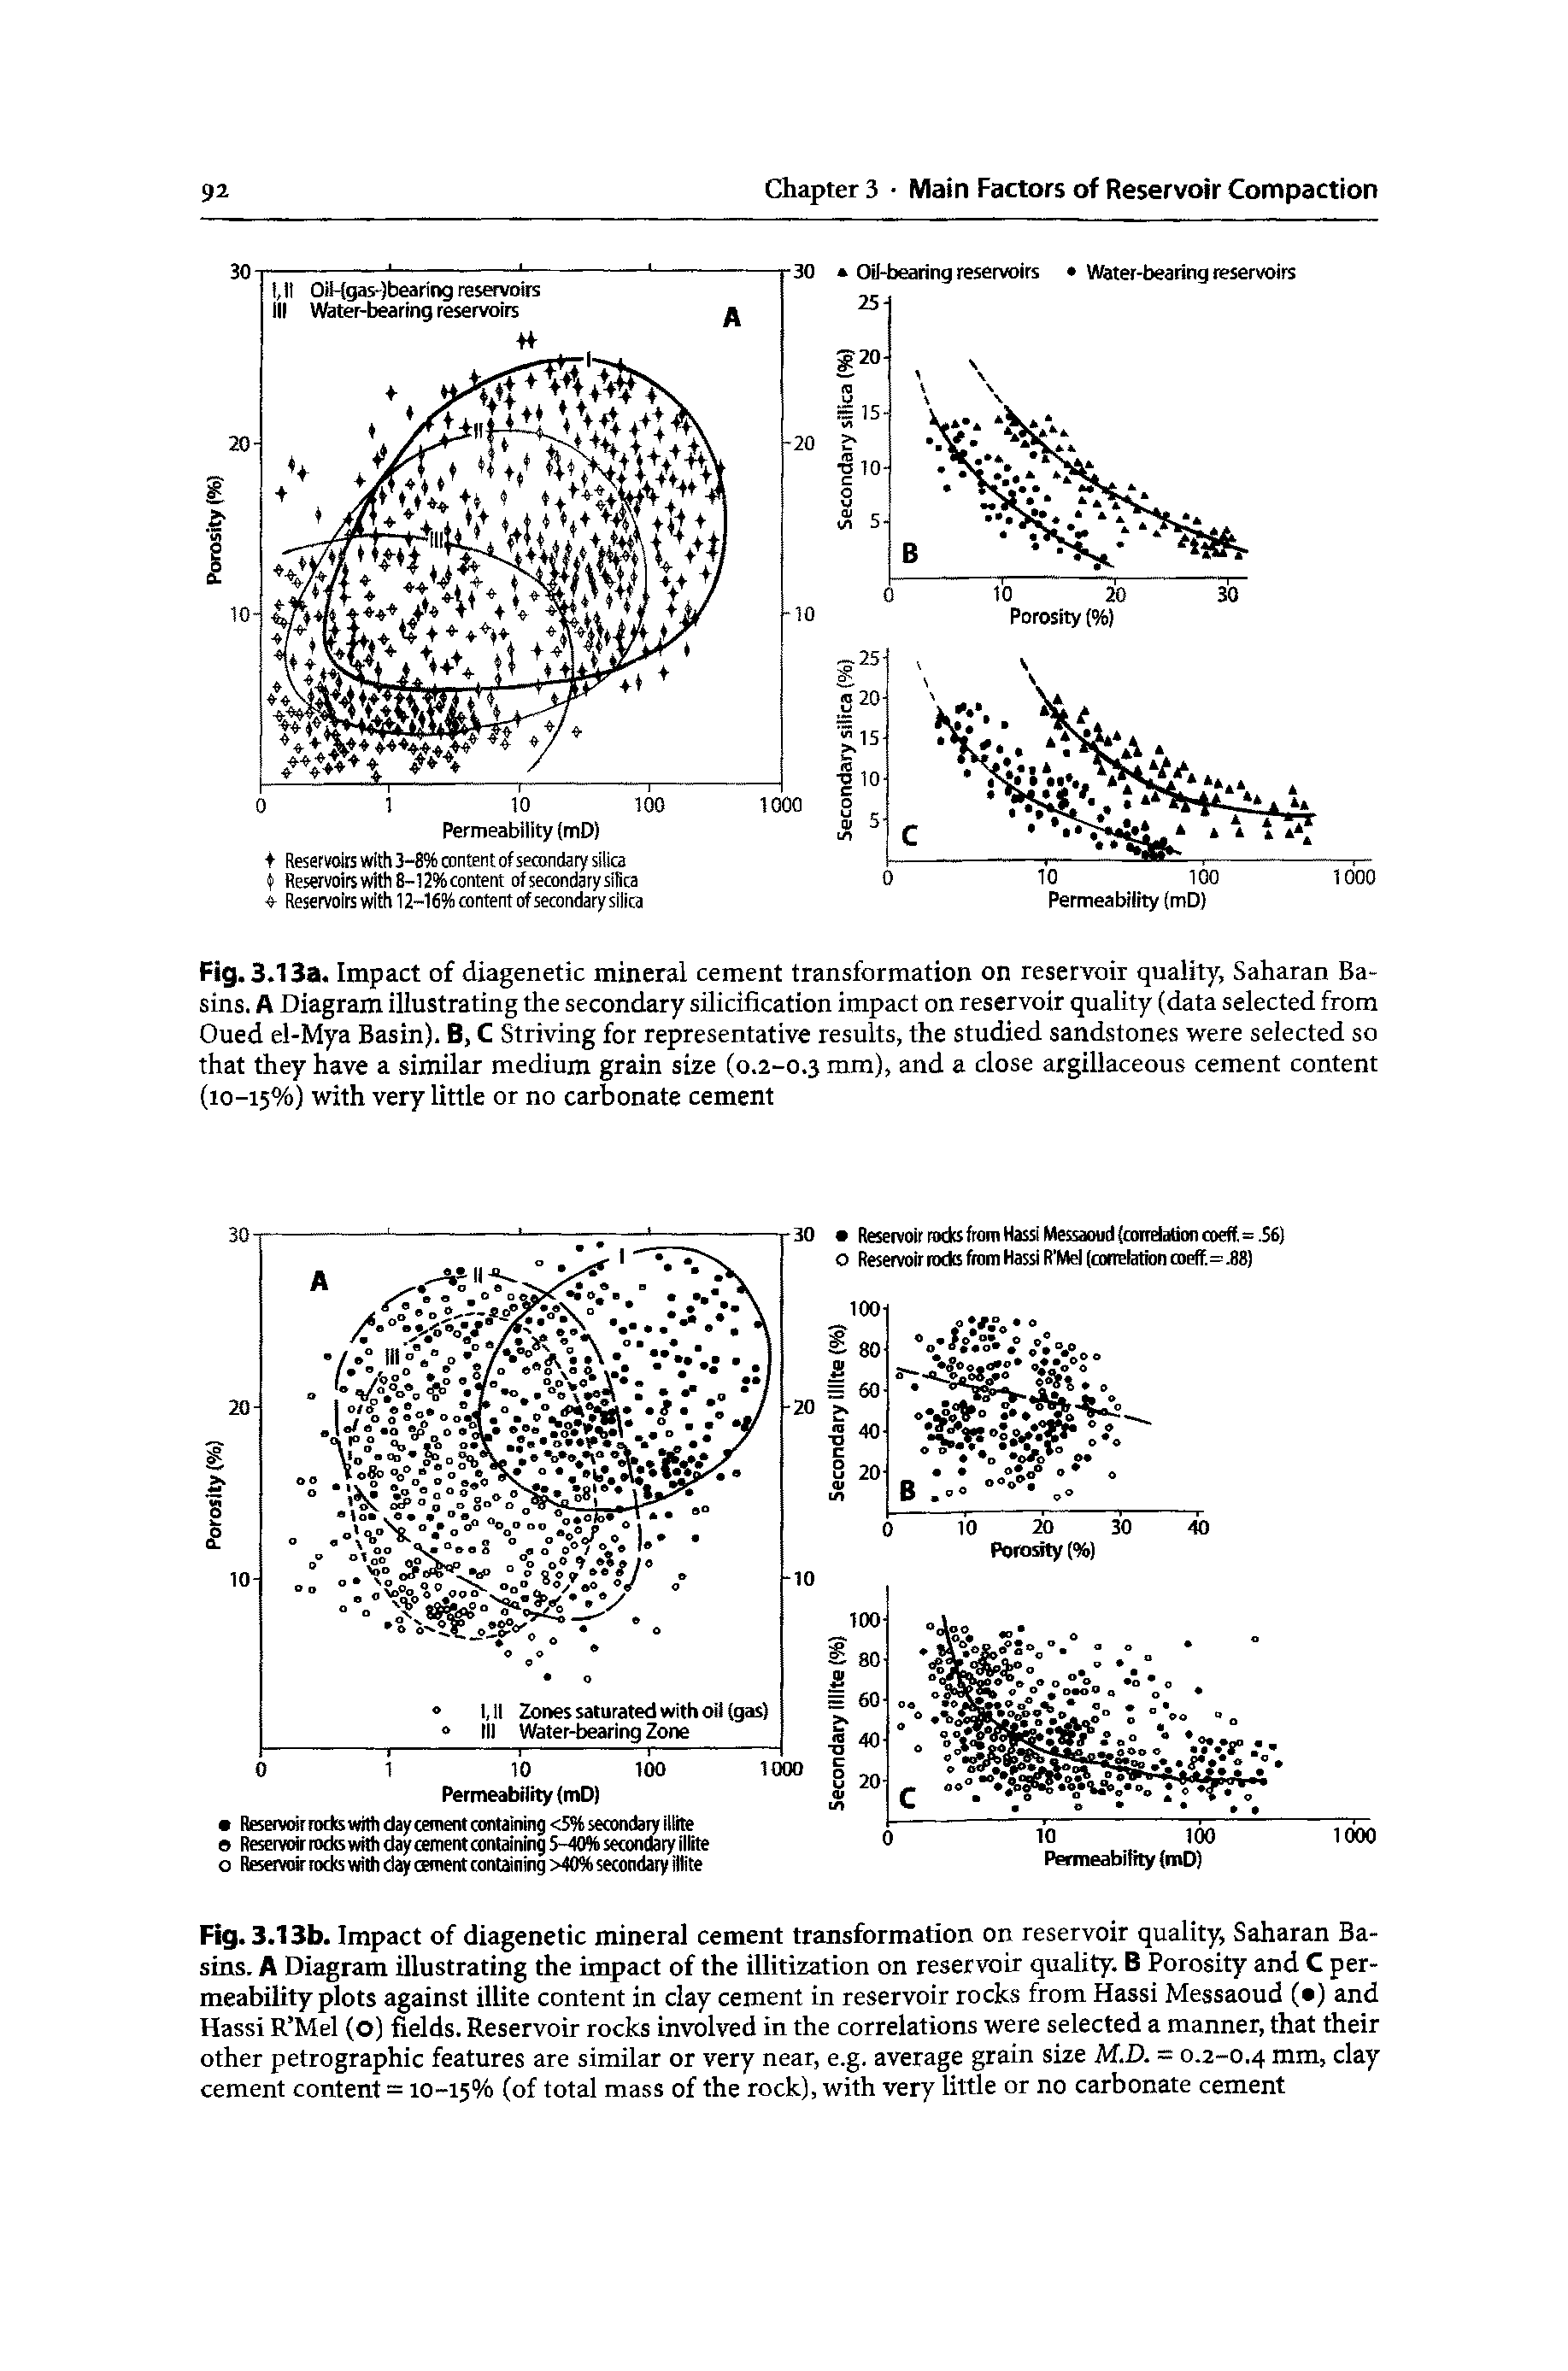 Fig. 3.13b. Impact of diagenetic mineral cement transformation on reservoir quality, Saharan Basins. A Diagram illustrating the impact of the illitization on reservoir quality. B Porosity and C permeability plots against illite content in clay cement in reservoir rocks from Hassi Messaoud ( ) and Hassi R Mel (o) fields. Reservoir rocks involved in the correlations were selected a manner, that their other petrographic features are similar or very near, e.g. average grain size M.D. = 0.2-0.4 mm, clay cement content = 10-15% (of total mass of the rock), with very little or no carbonate cement...